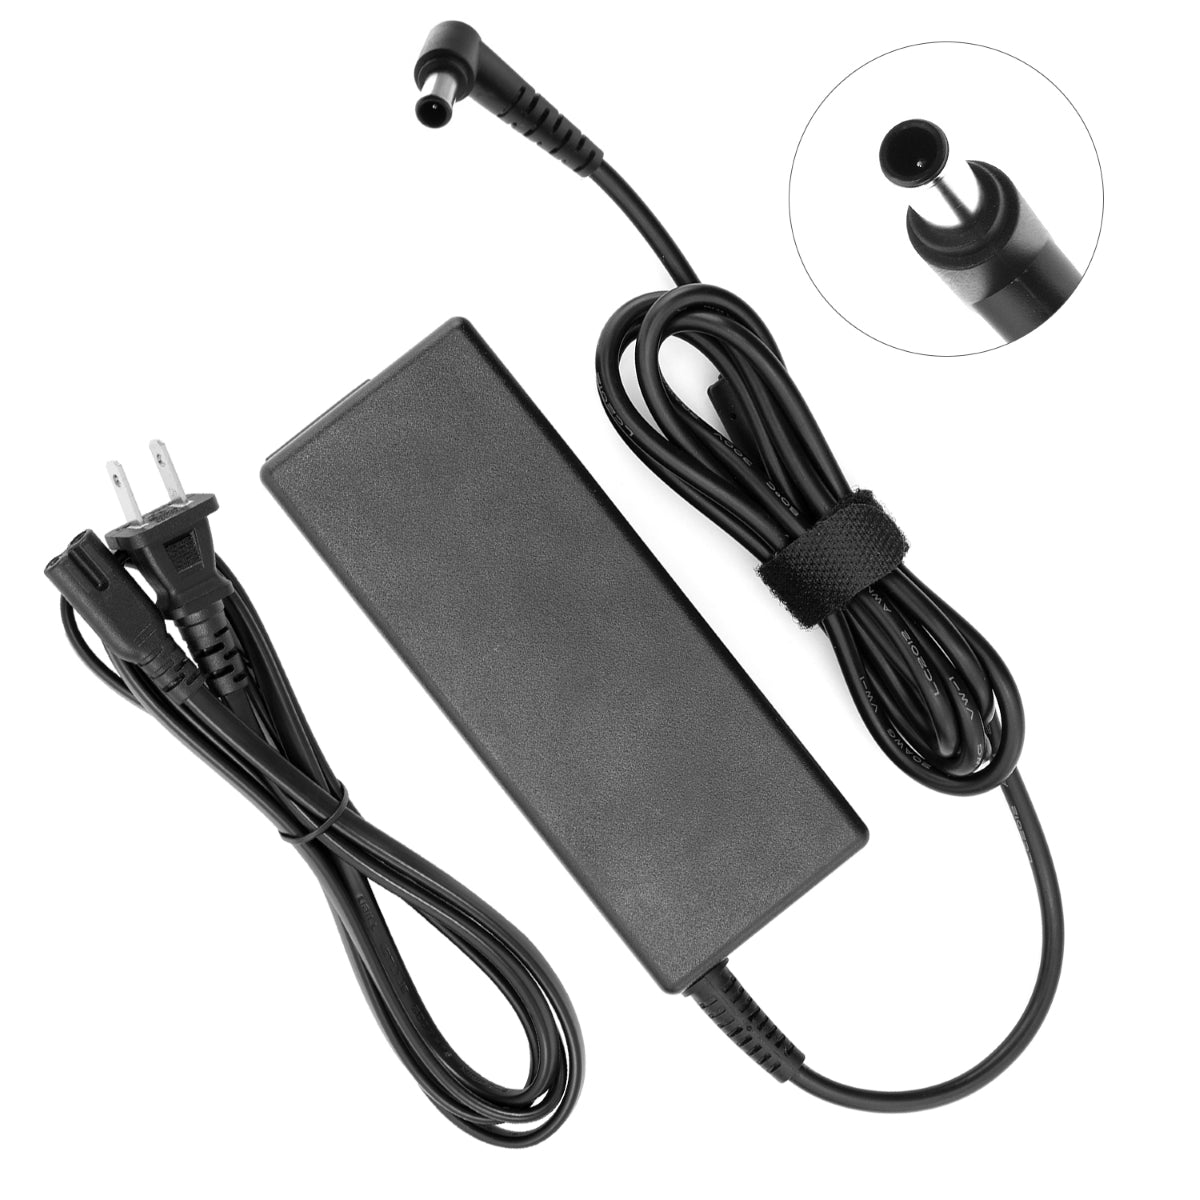 AC Adapter for LG 23EA63T Monitor